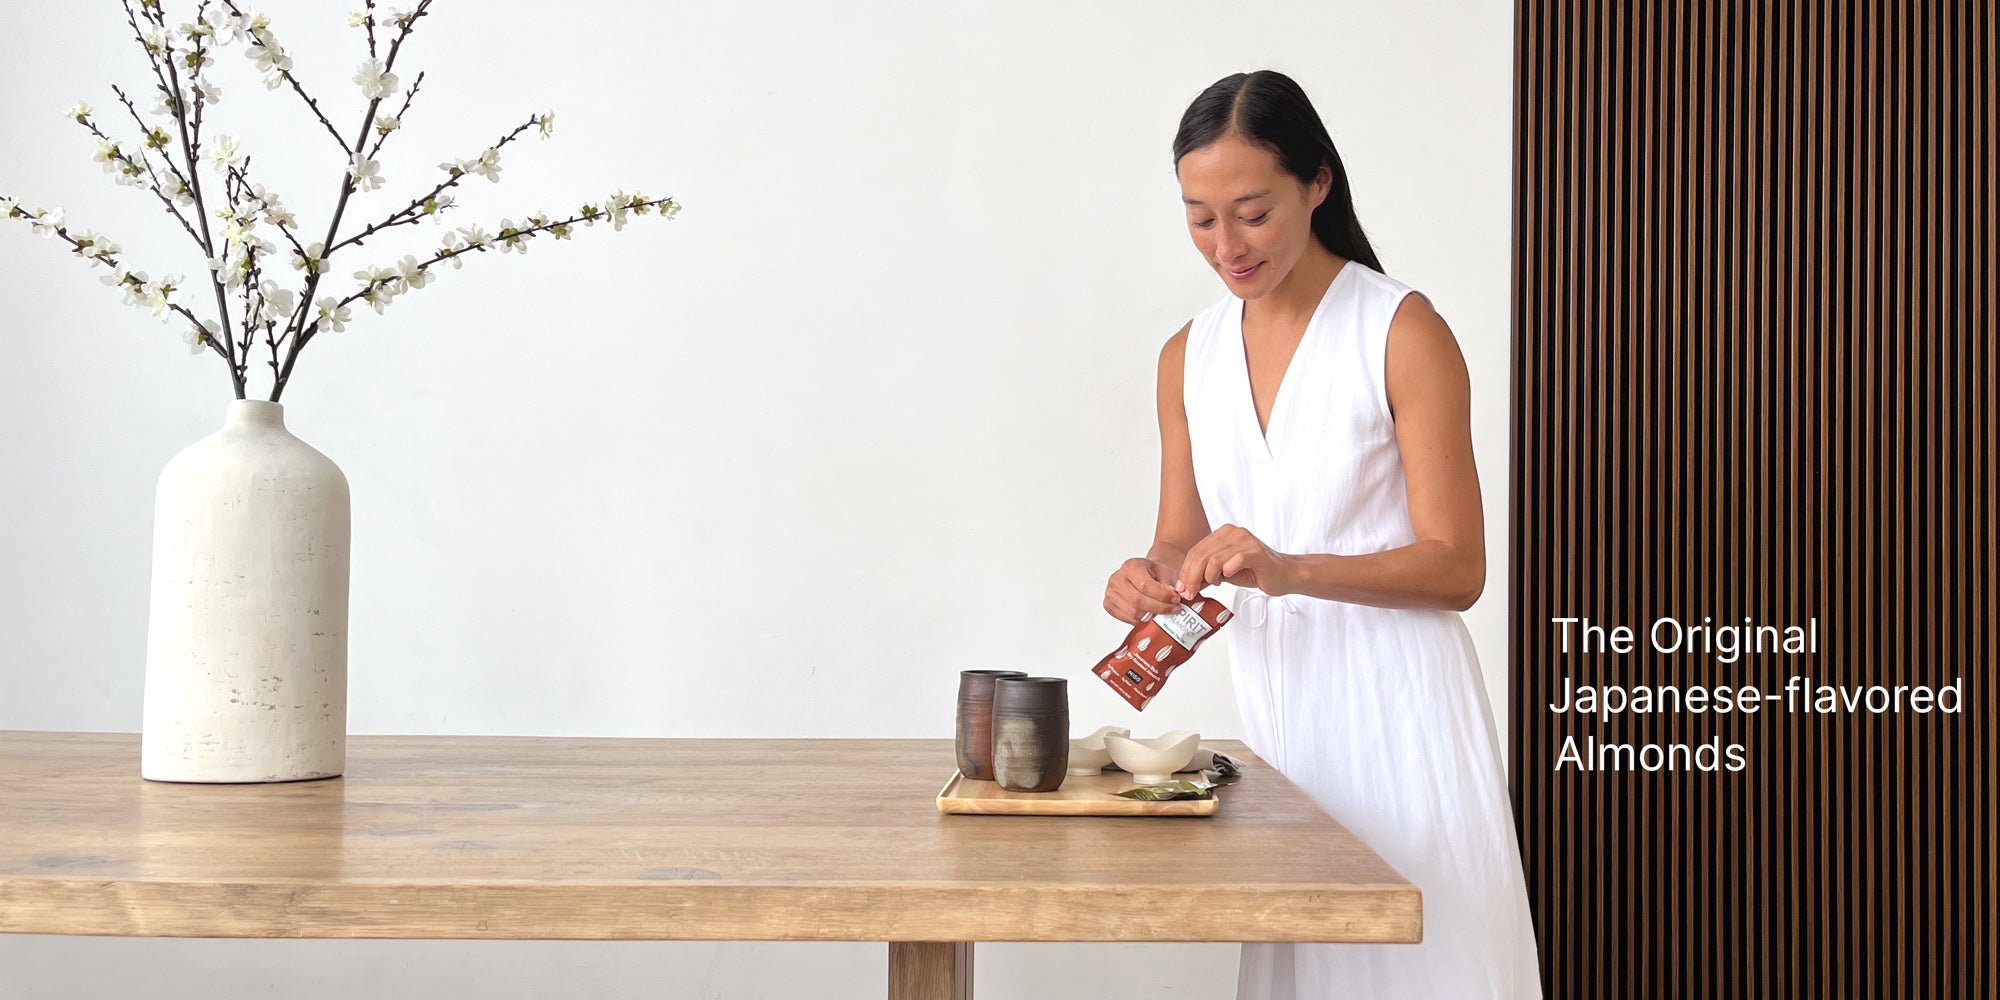 Woman opening a package of SPIRIT Almond in a minimalist Japanese room. Titles: "The Original Japanese-flavored Almonds"